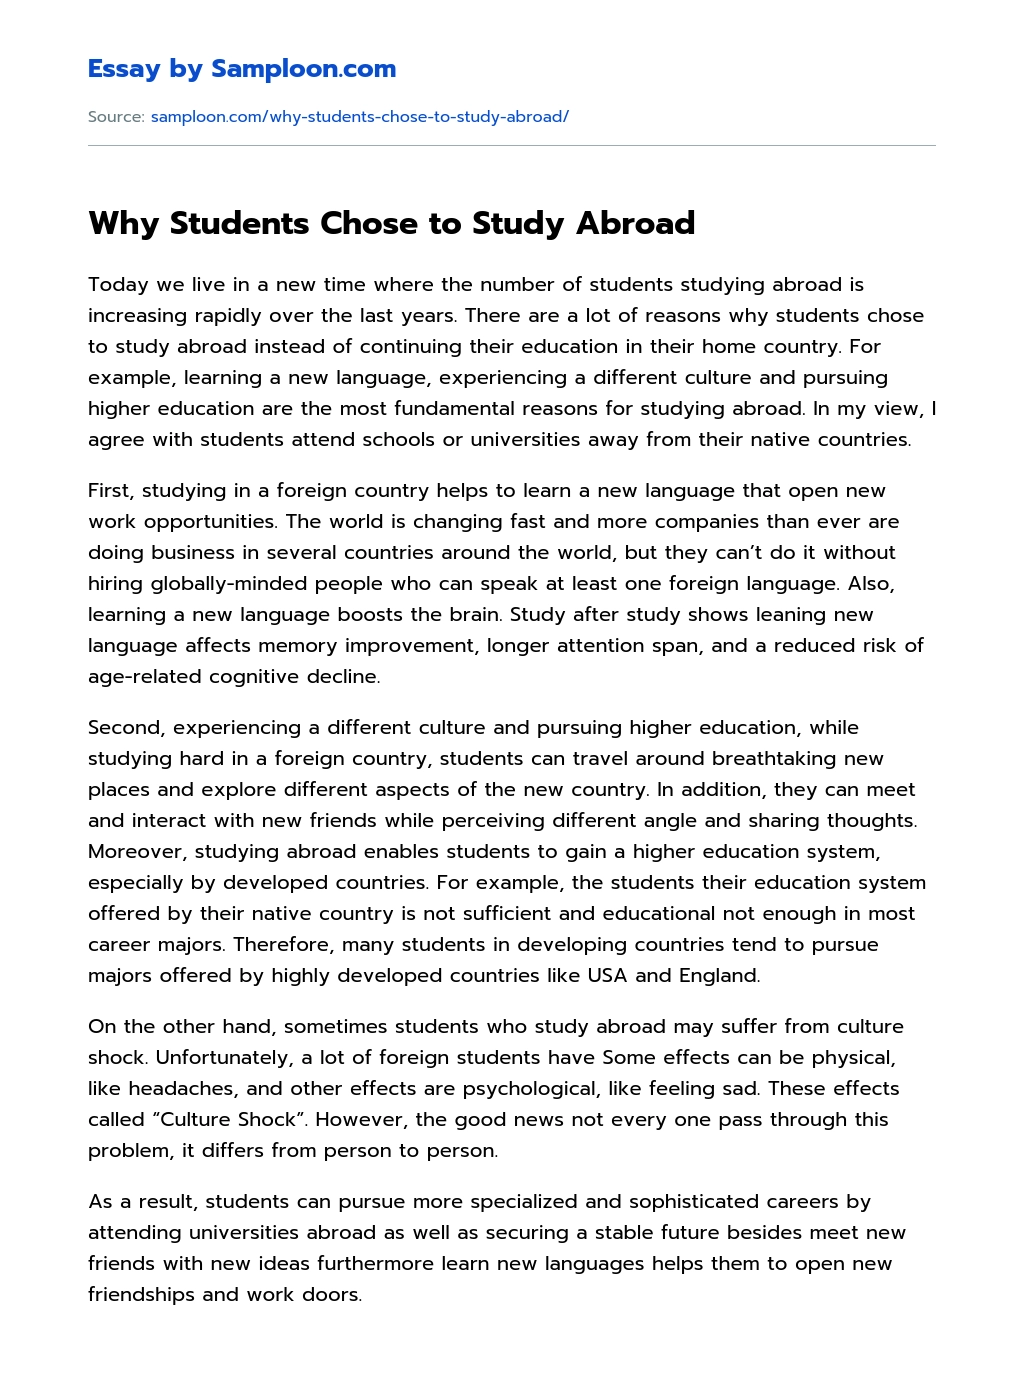 Why Students Chose to Study Abroad essay